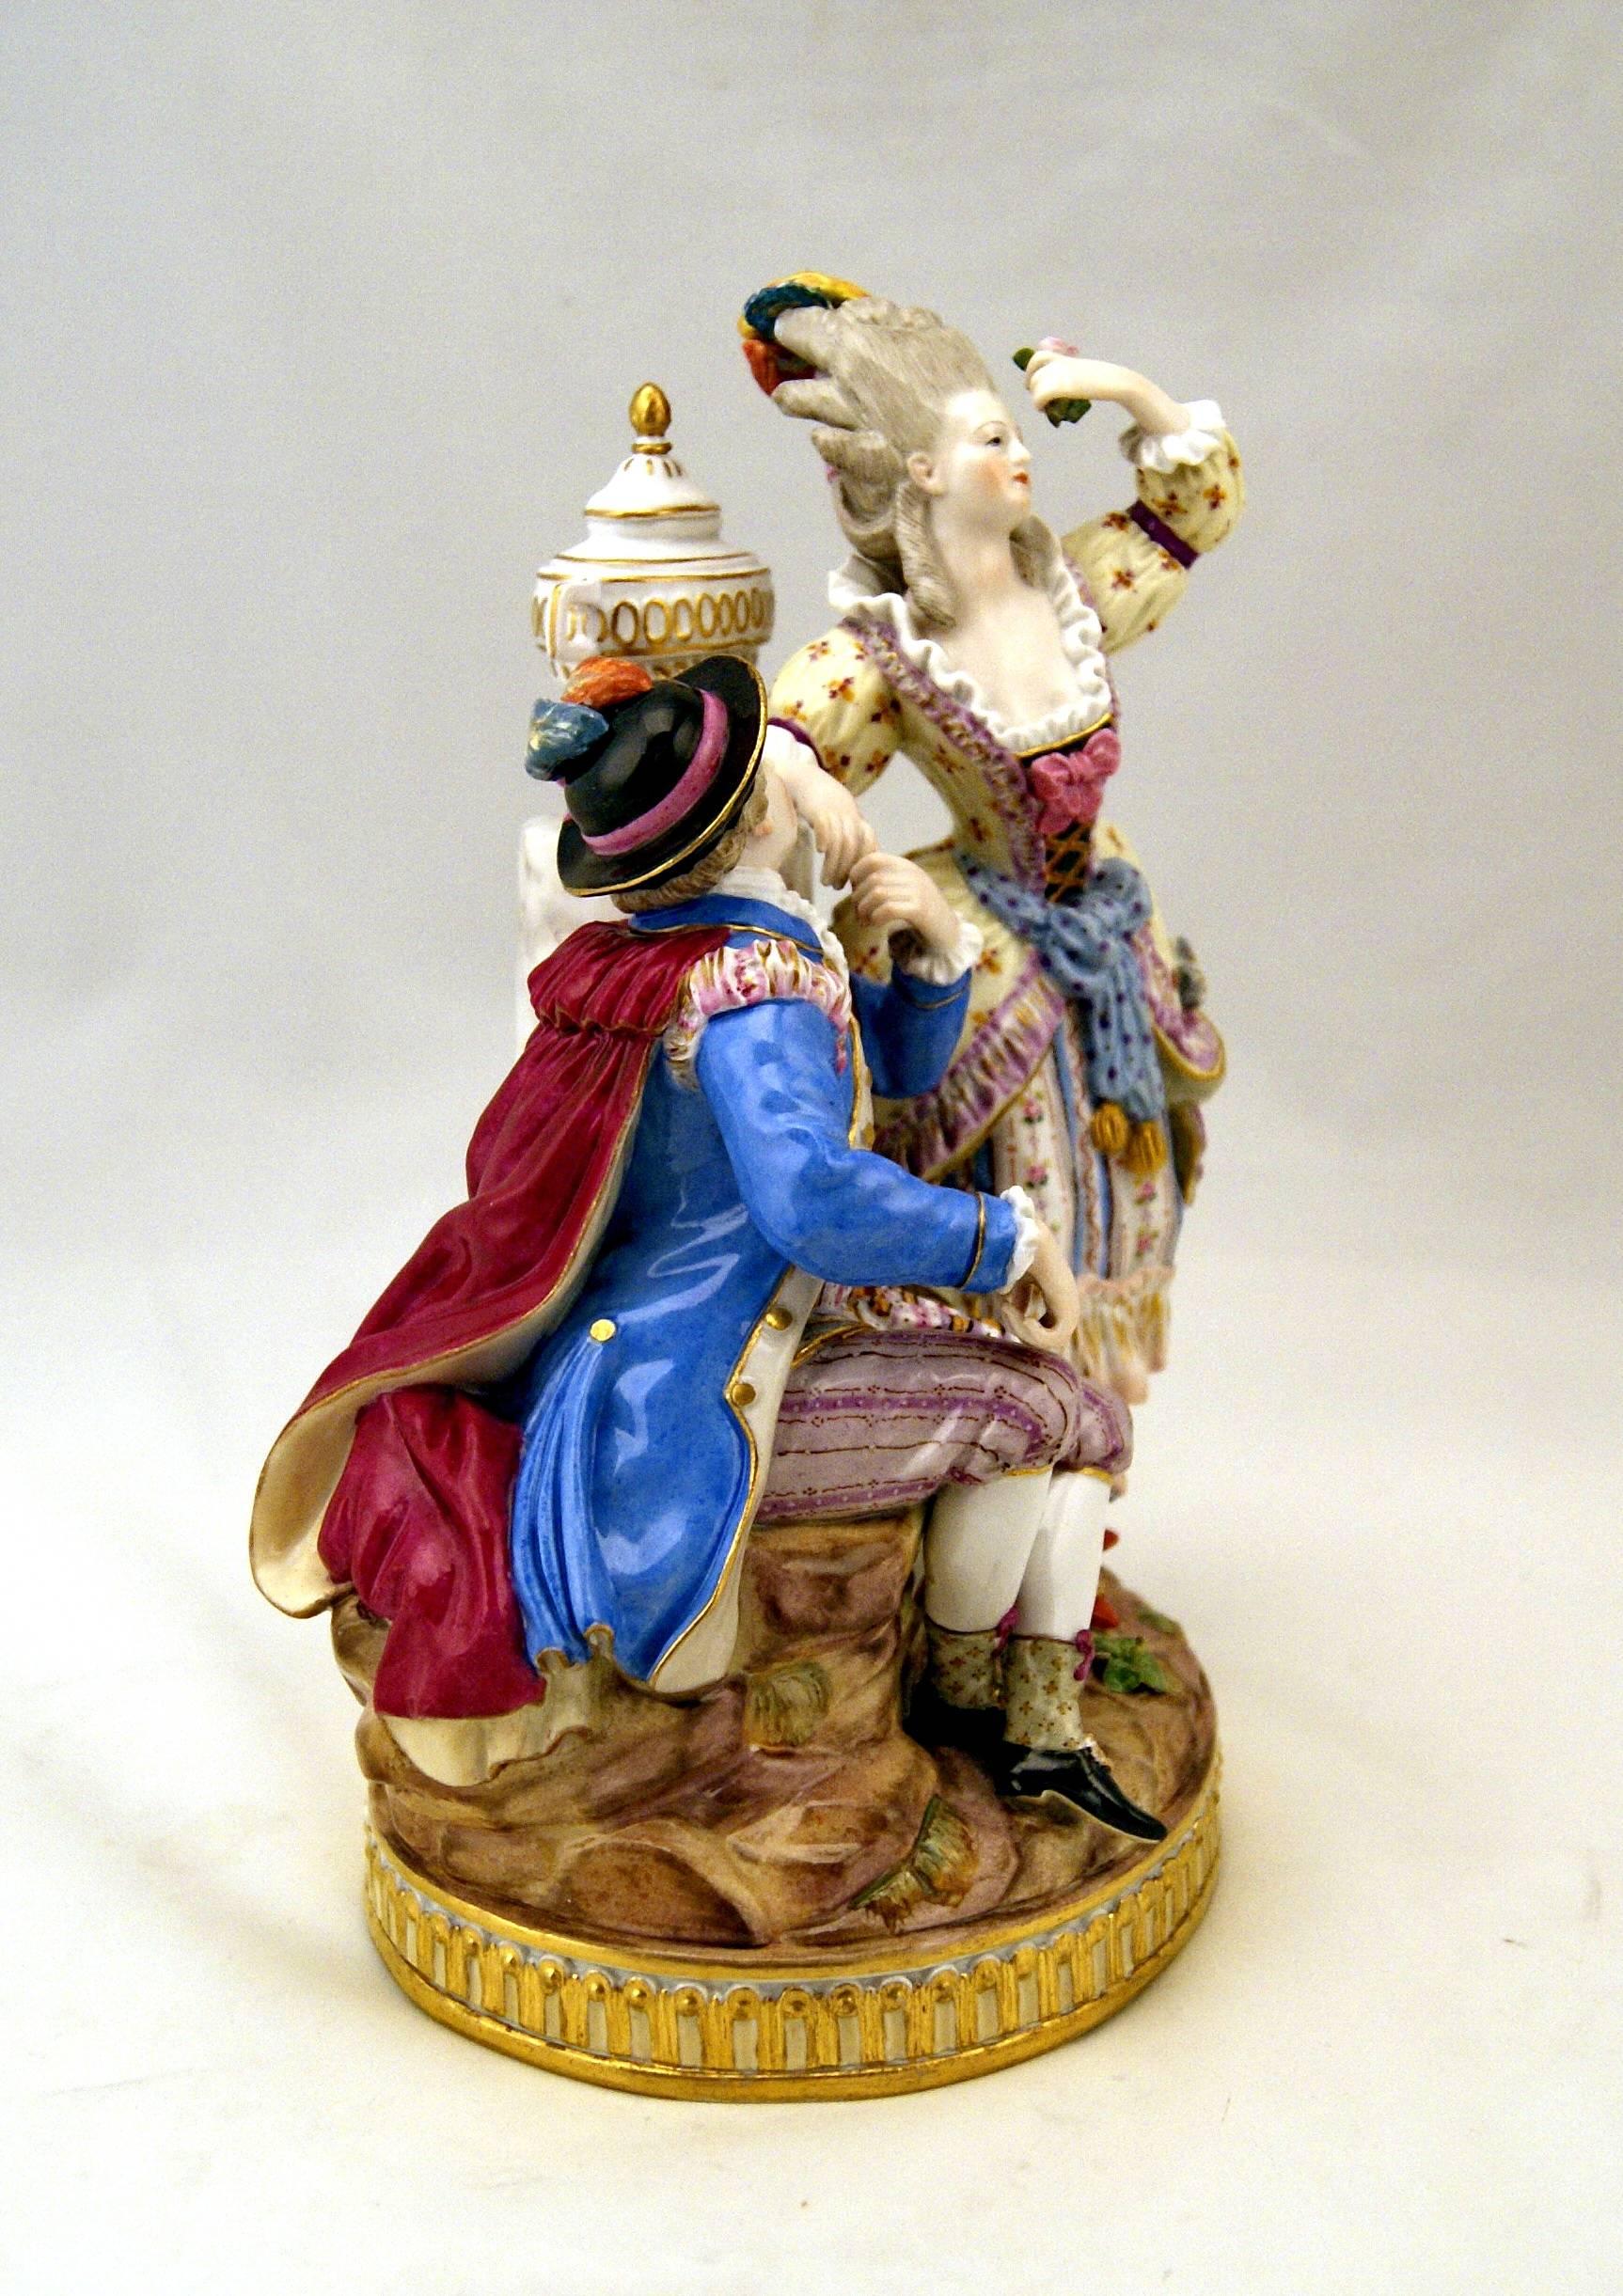 Meissen gorgeous figurine group of finest quality: 
There are two figurines - a couple - visible, both clad in finest rococo garments.

Manufactory: Meissen.
Dating: Mid-19th century made circa, 1860-1870.

Model number f 98 / former's number